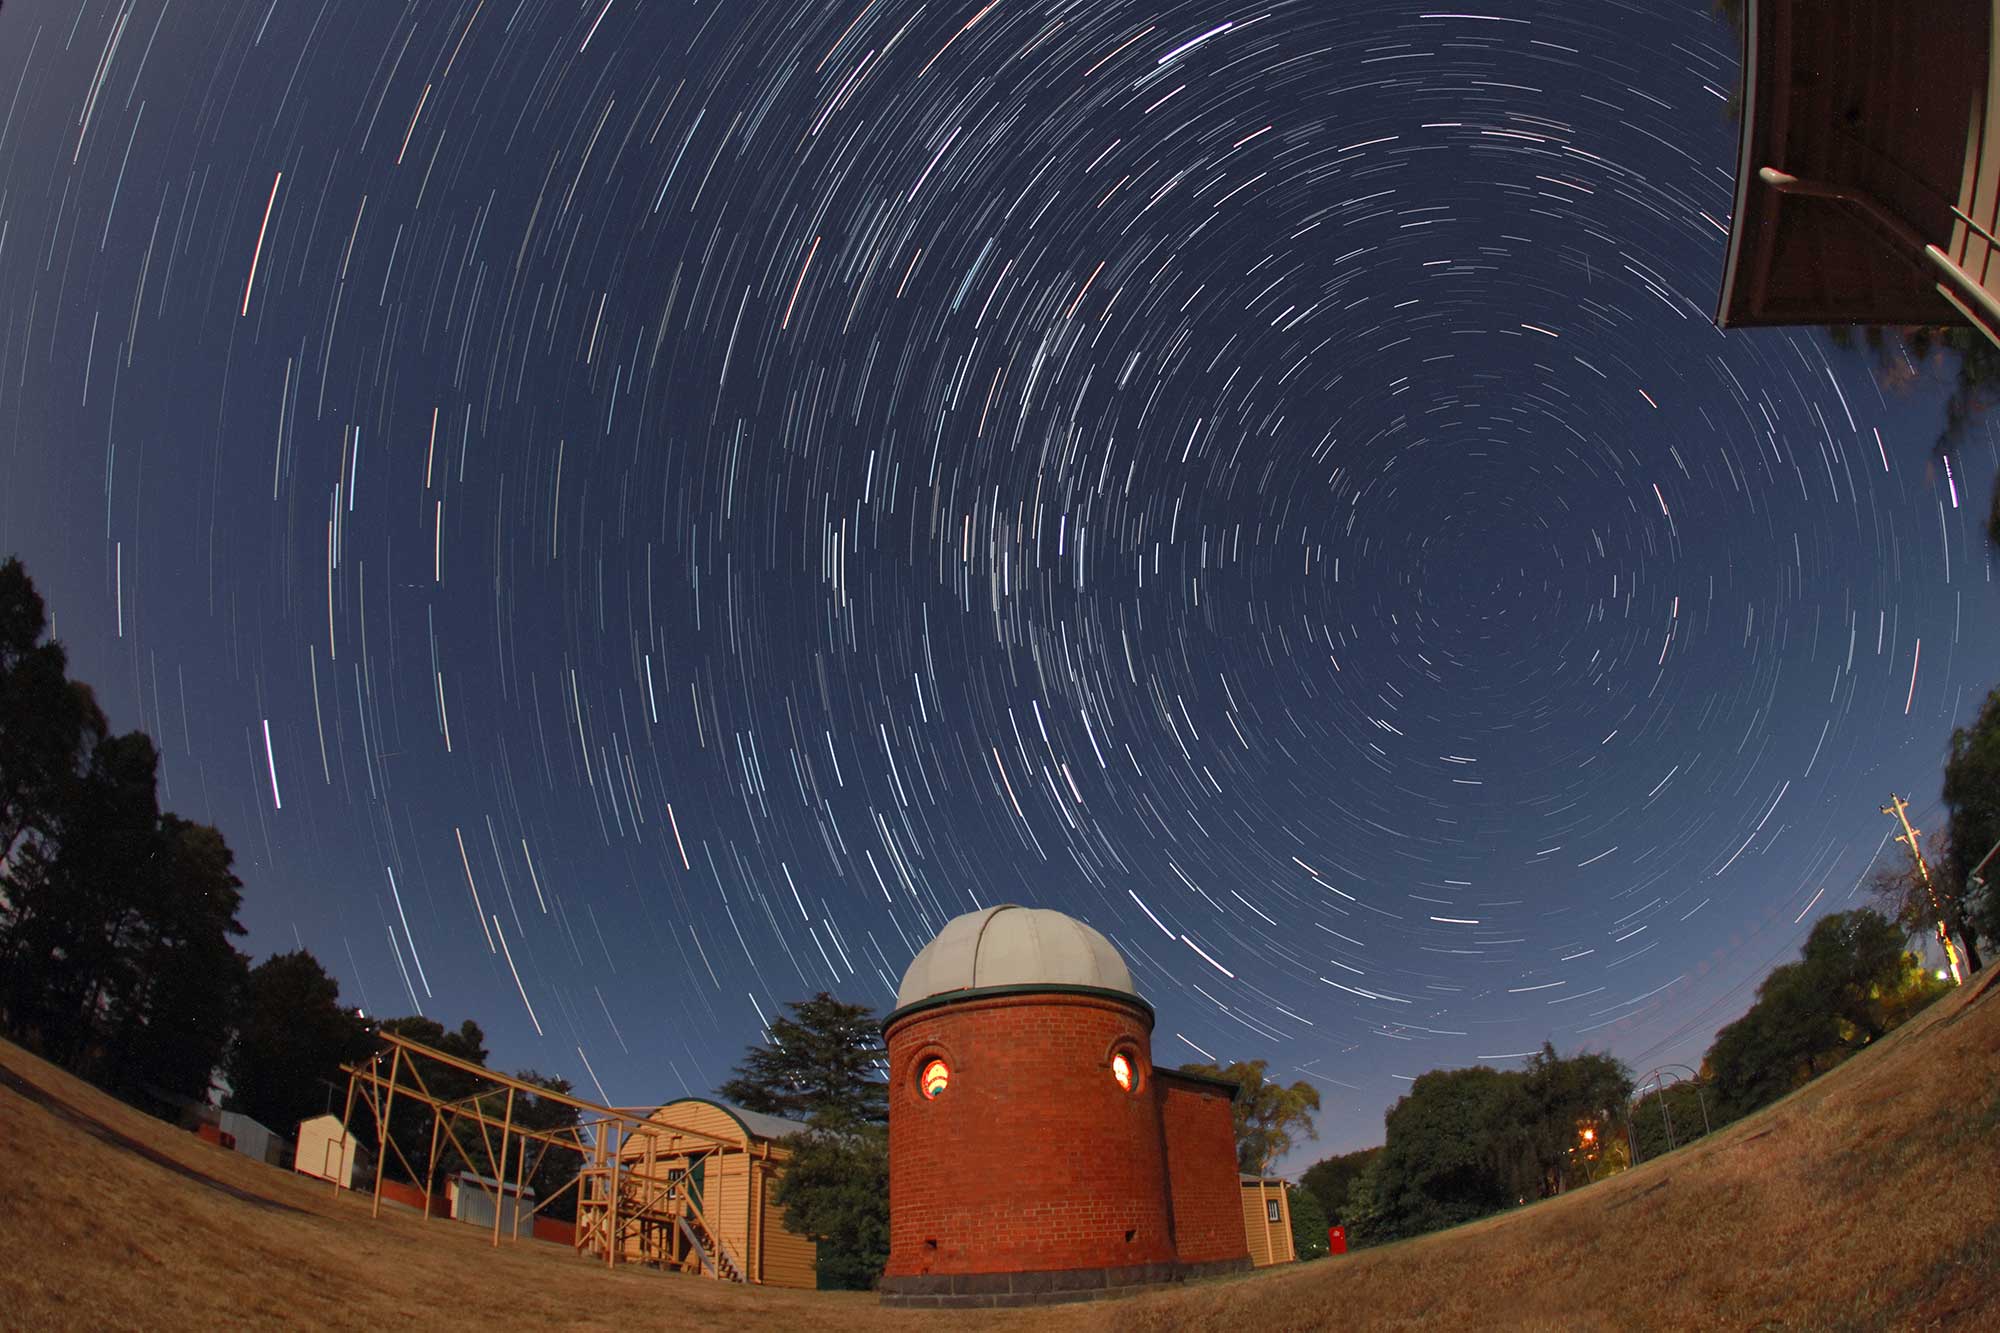 Star trails around the south celestial pole above the Jelbart Dome Building